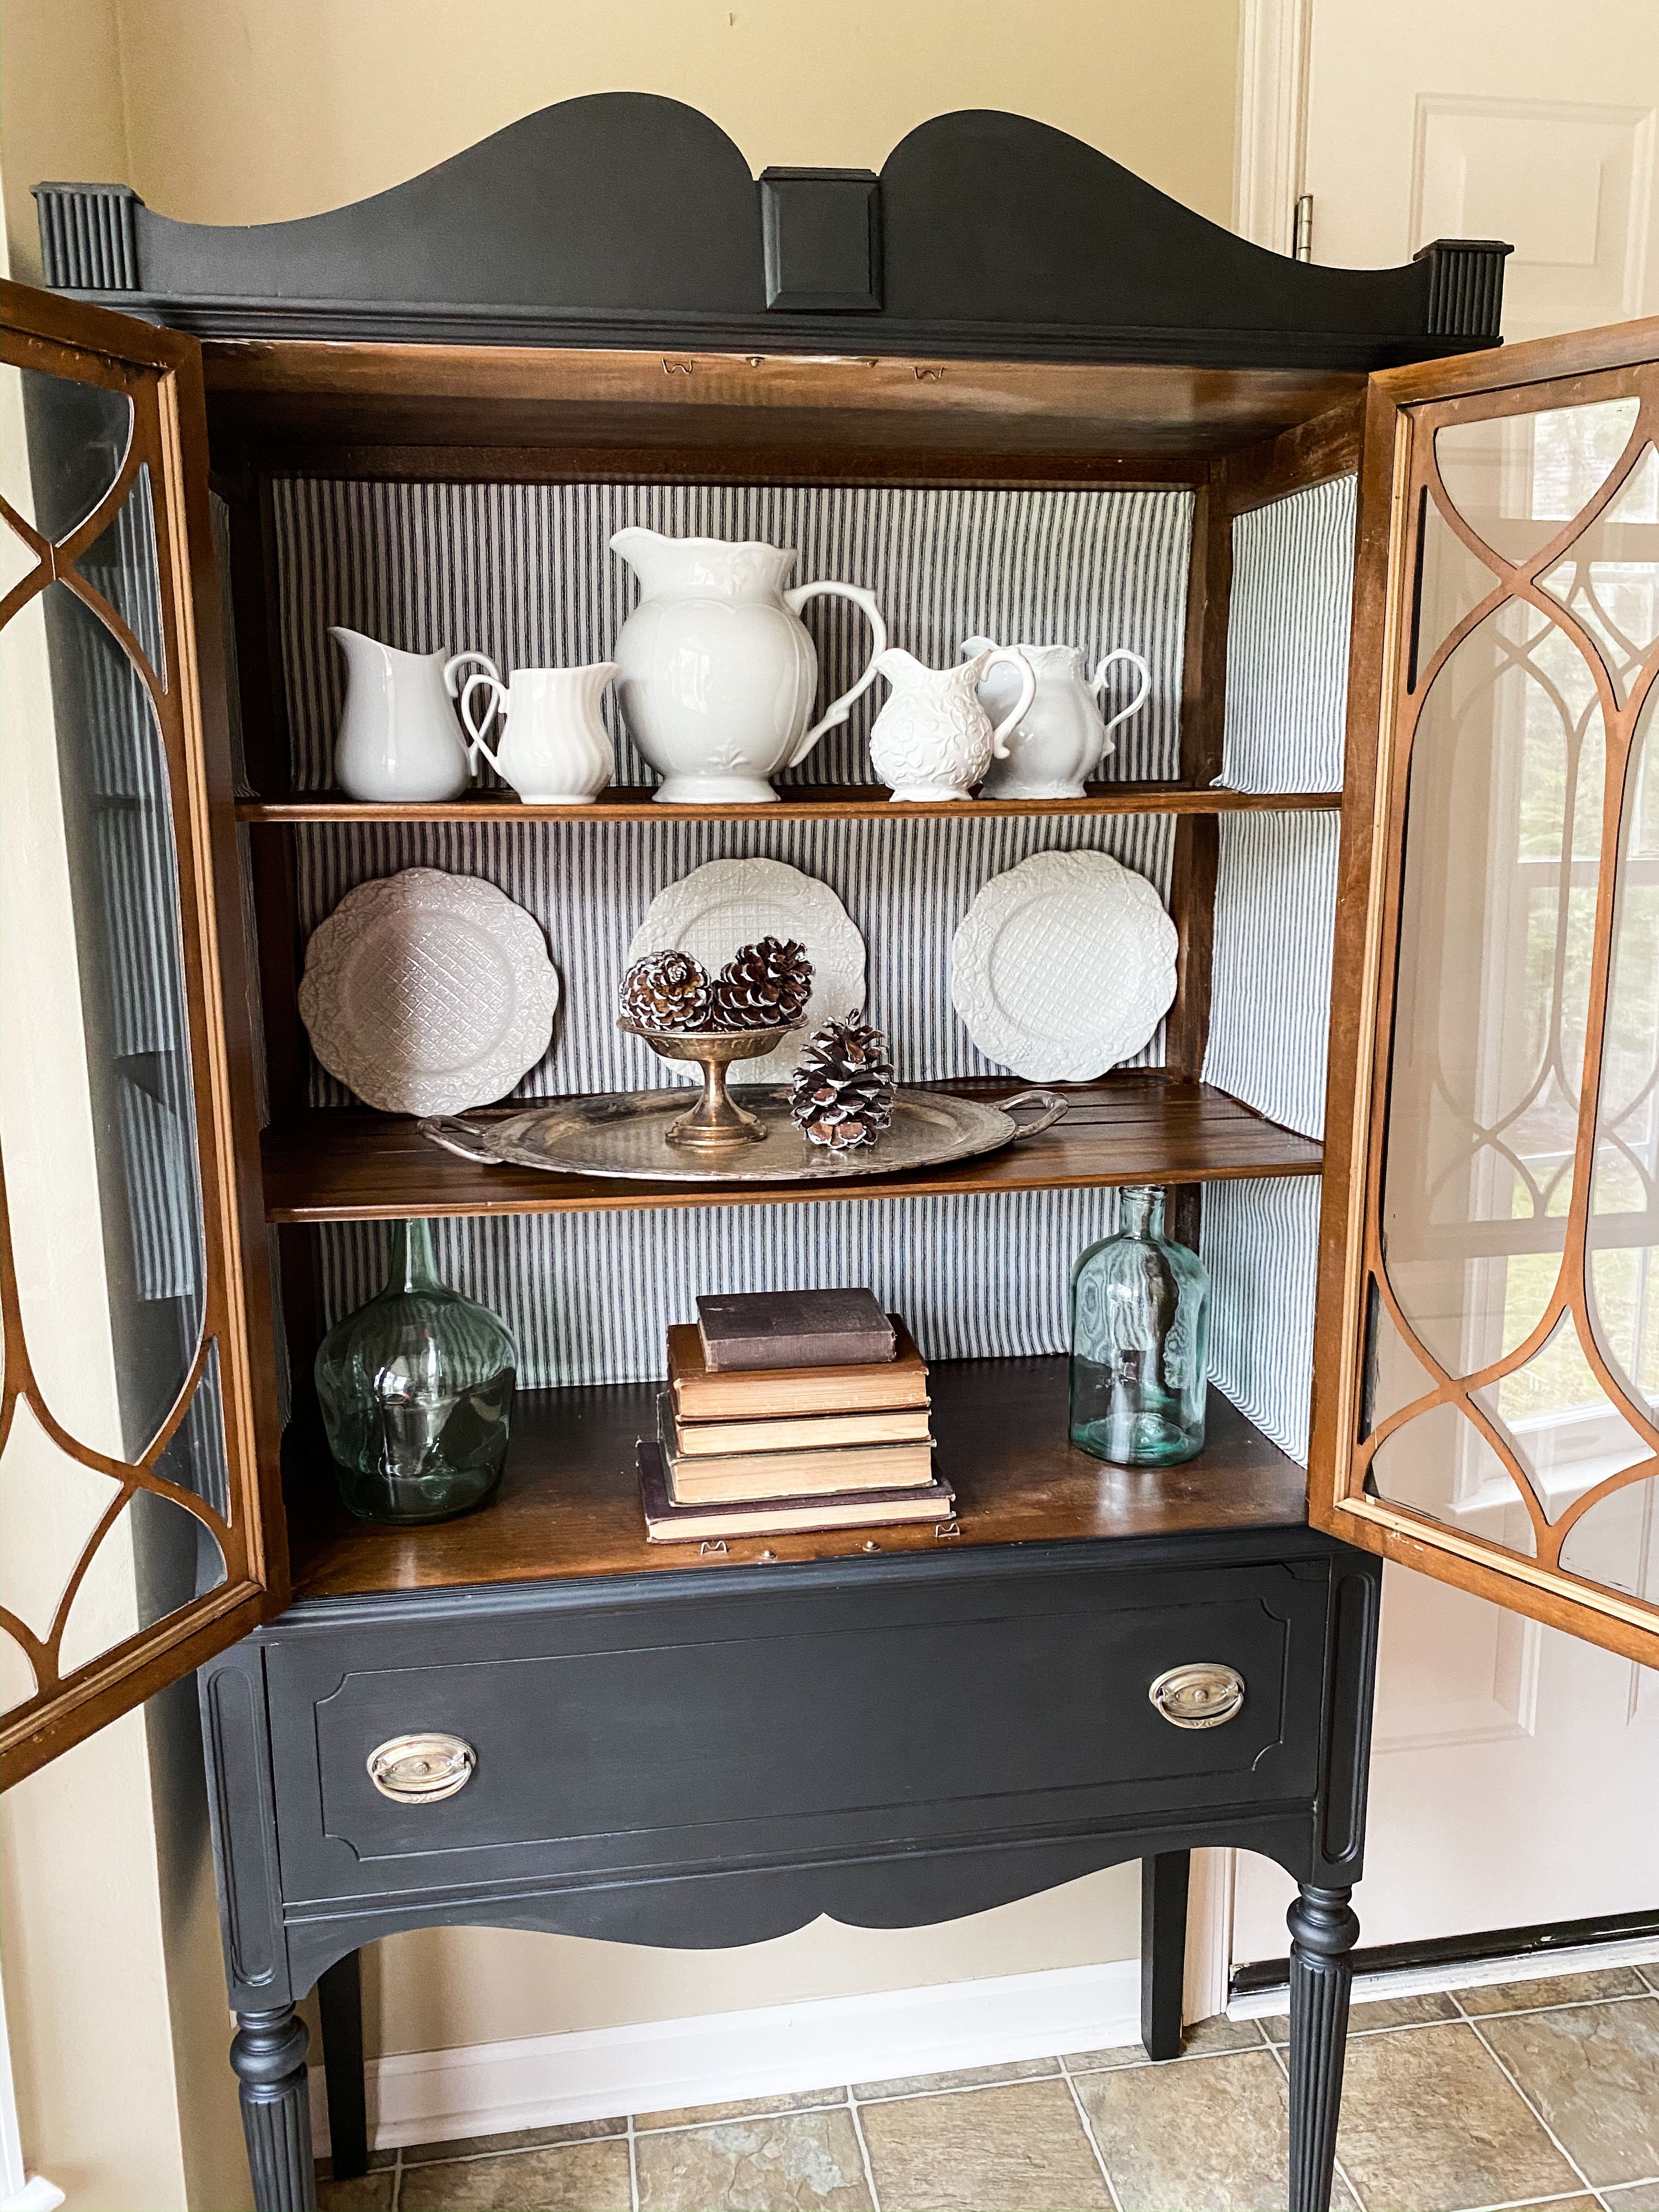 The China Cabinet From Hell